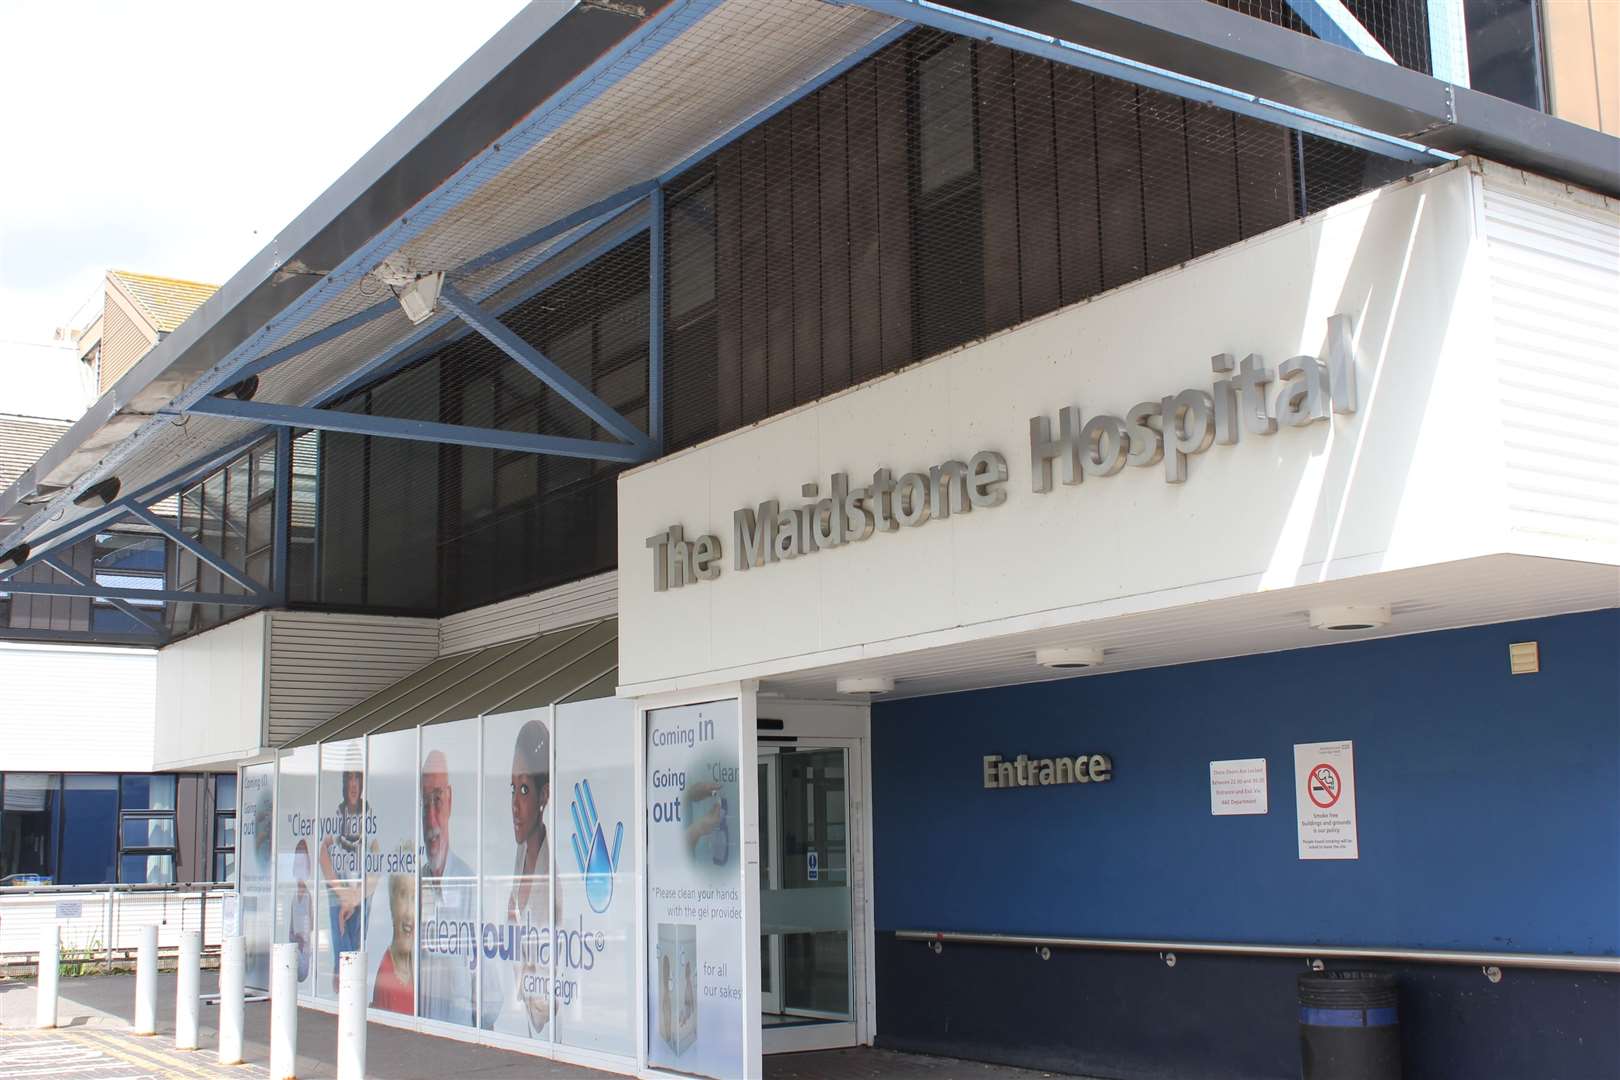 The rescued man ended up in Maidstone Hospital - twice